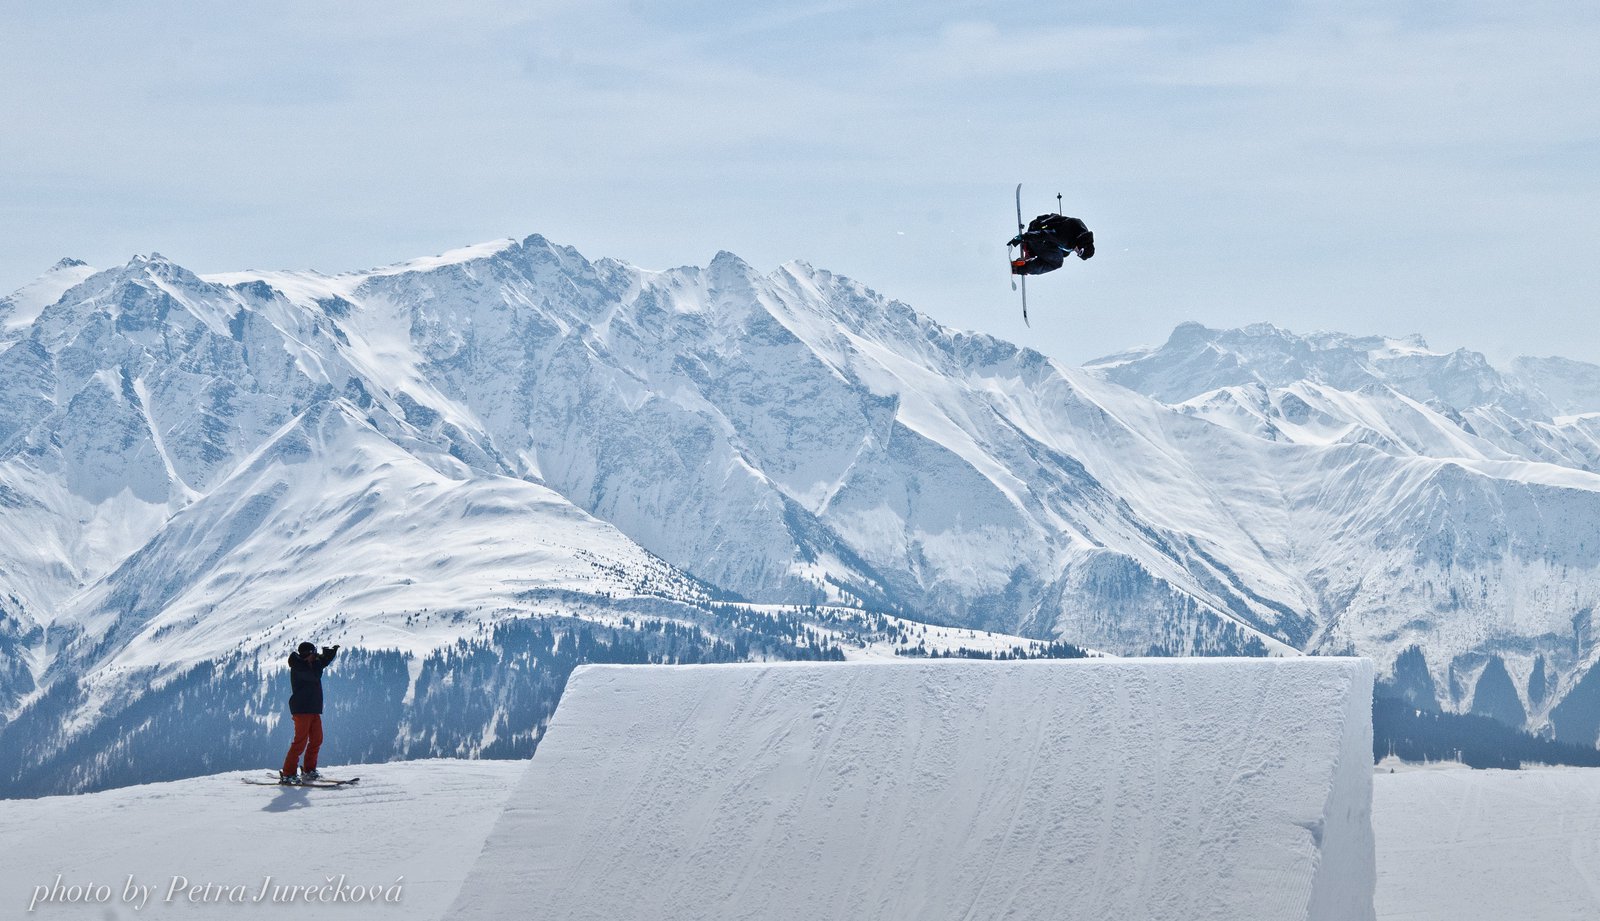 One day of filming in Laax, Switzerland